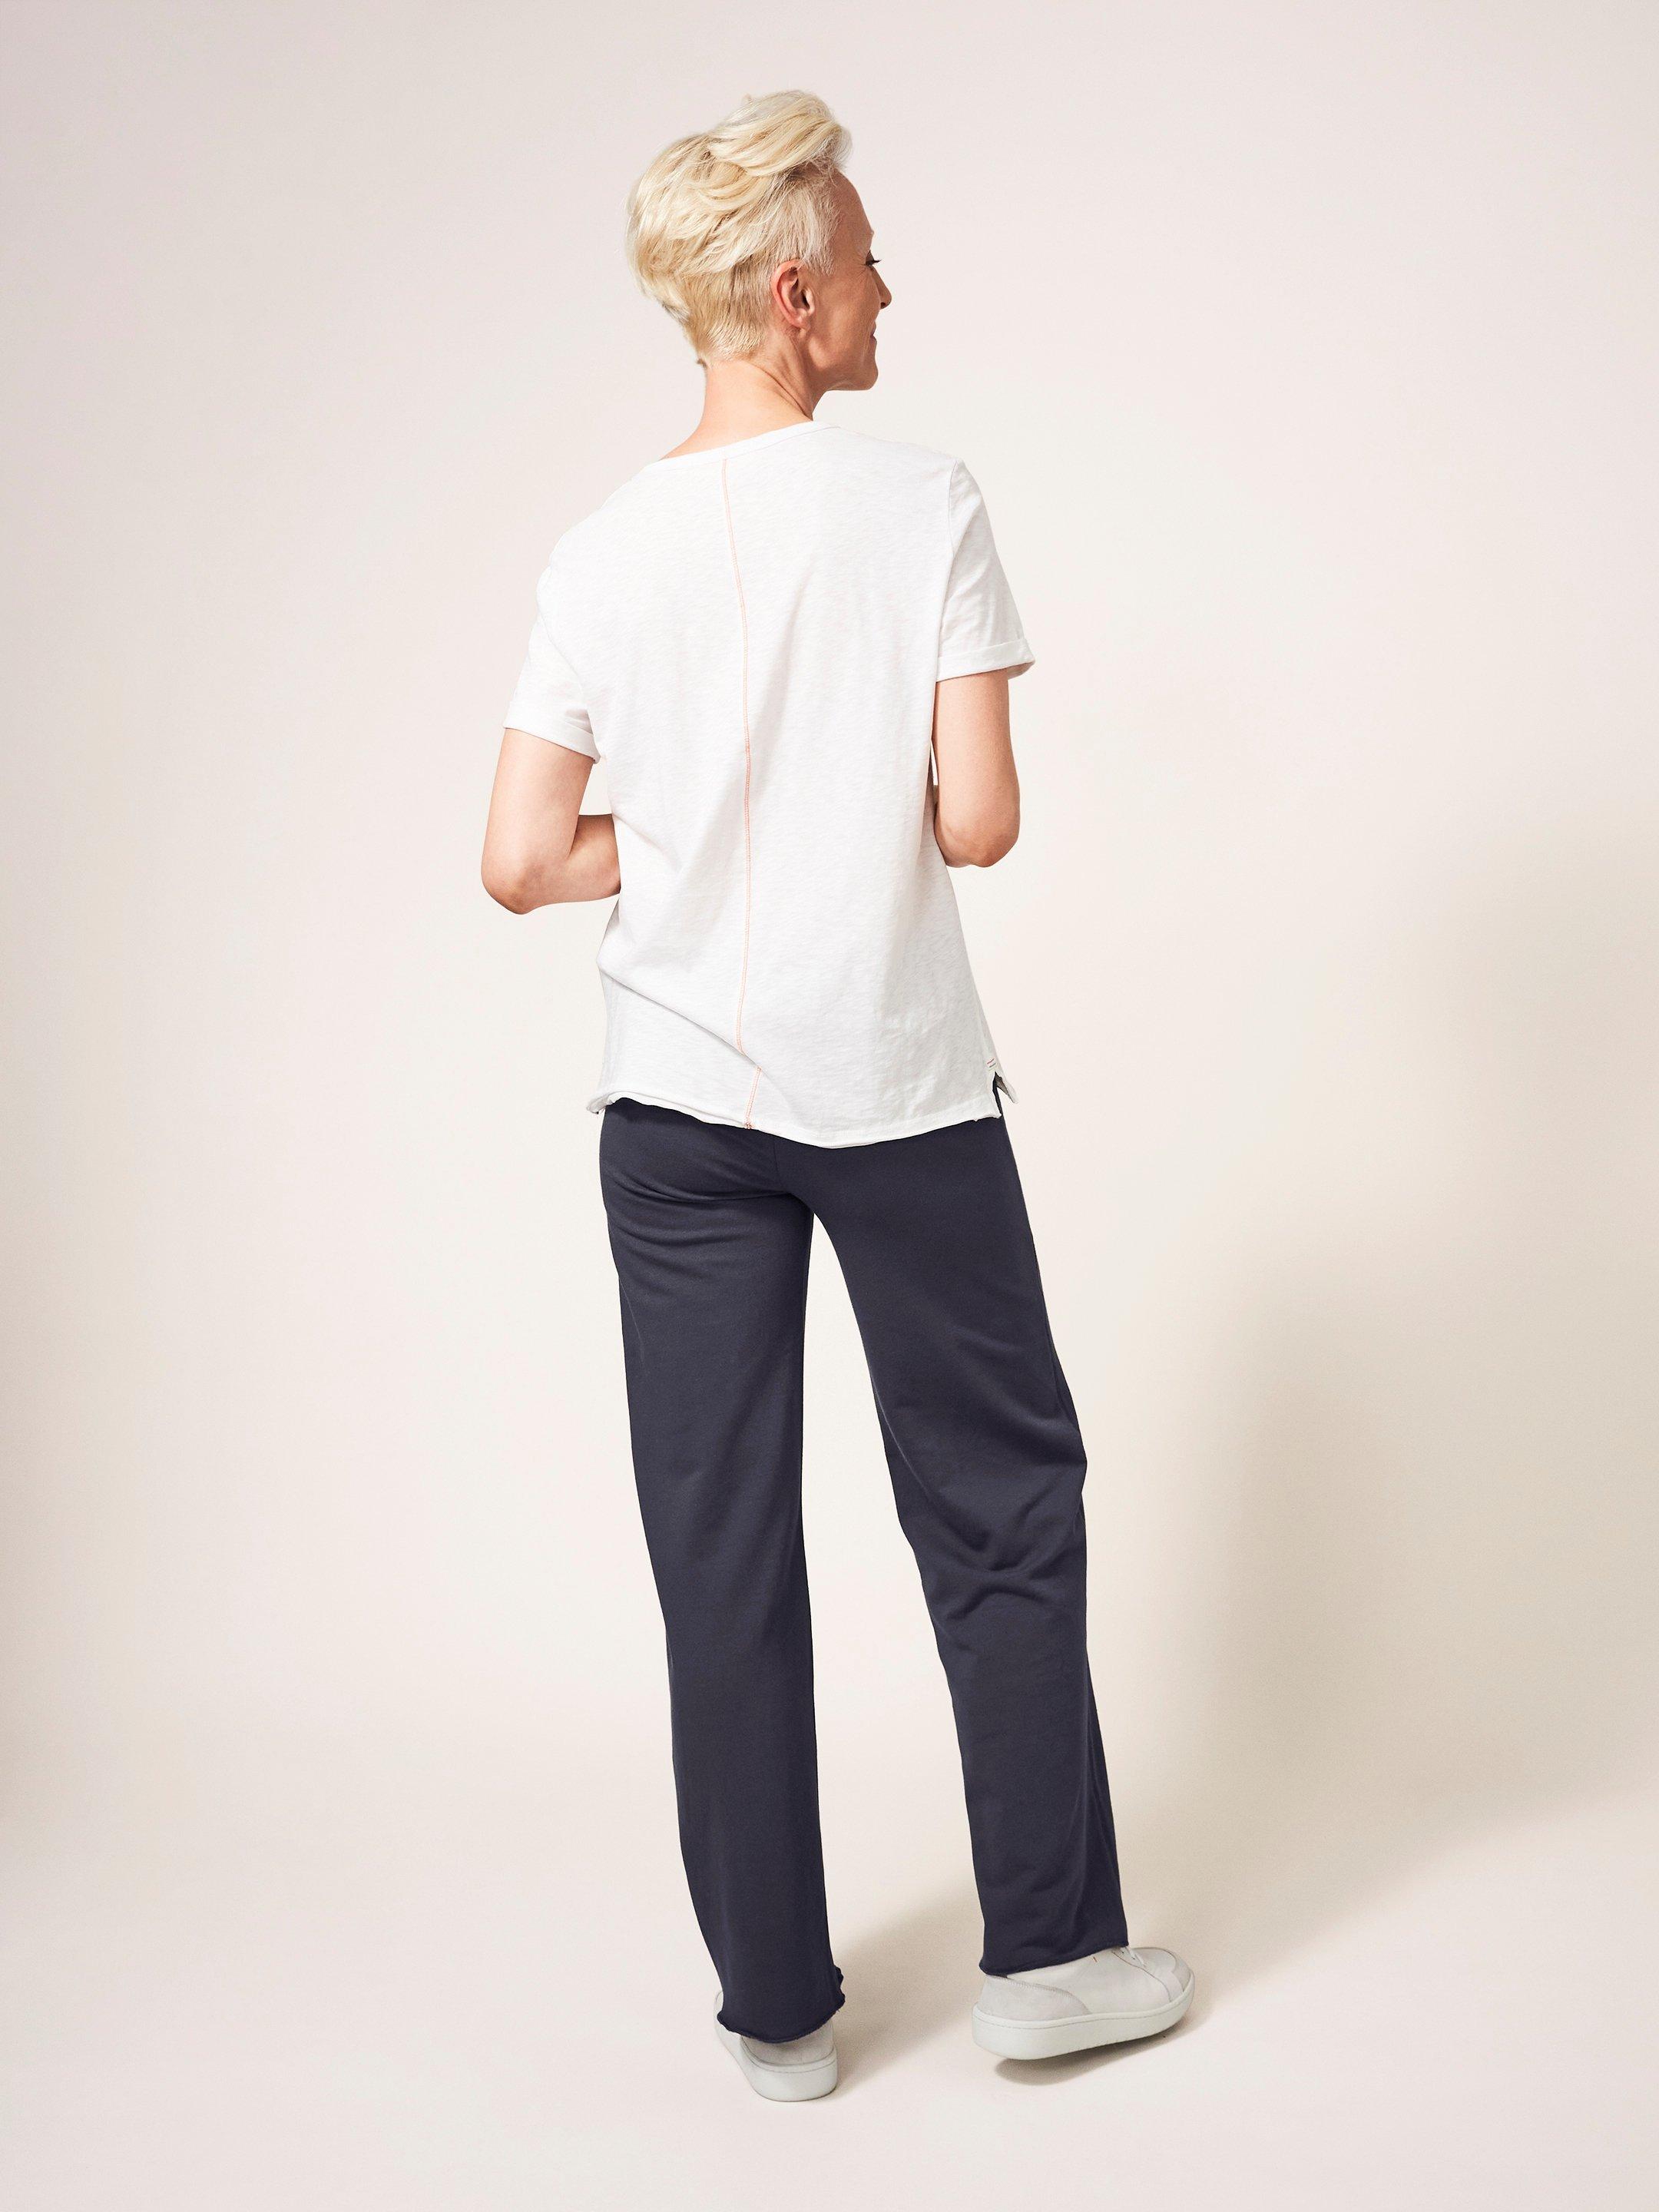 Dolce Organic Pant in CHARC GREY - MODEL BACK